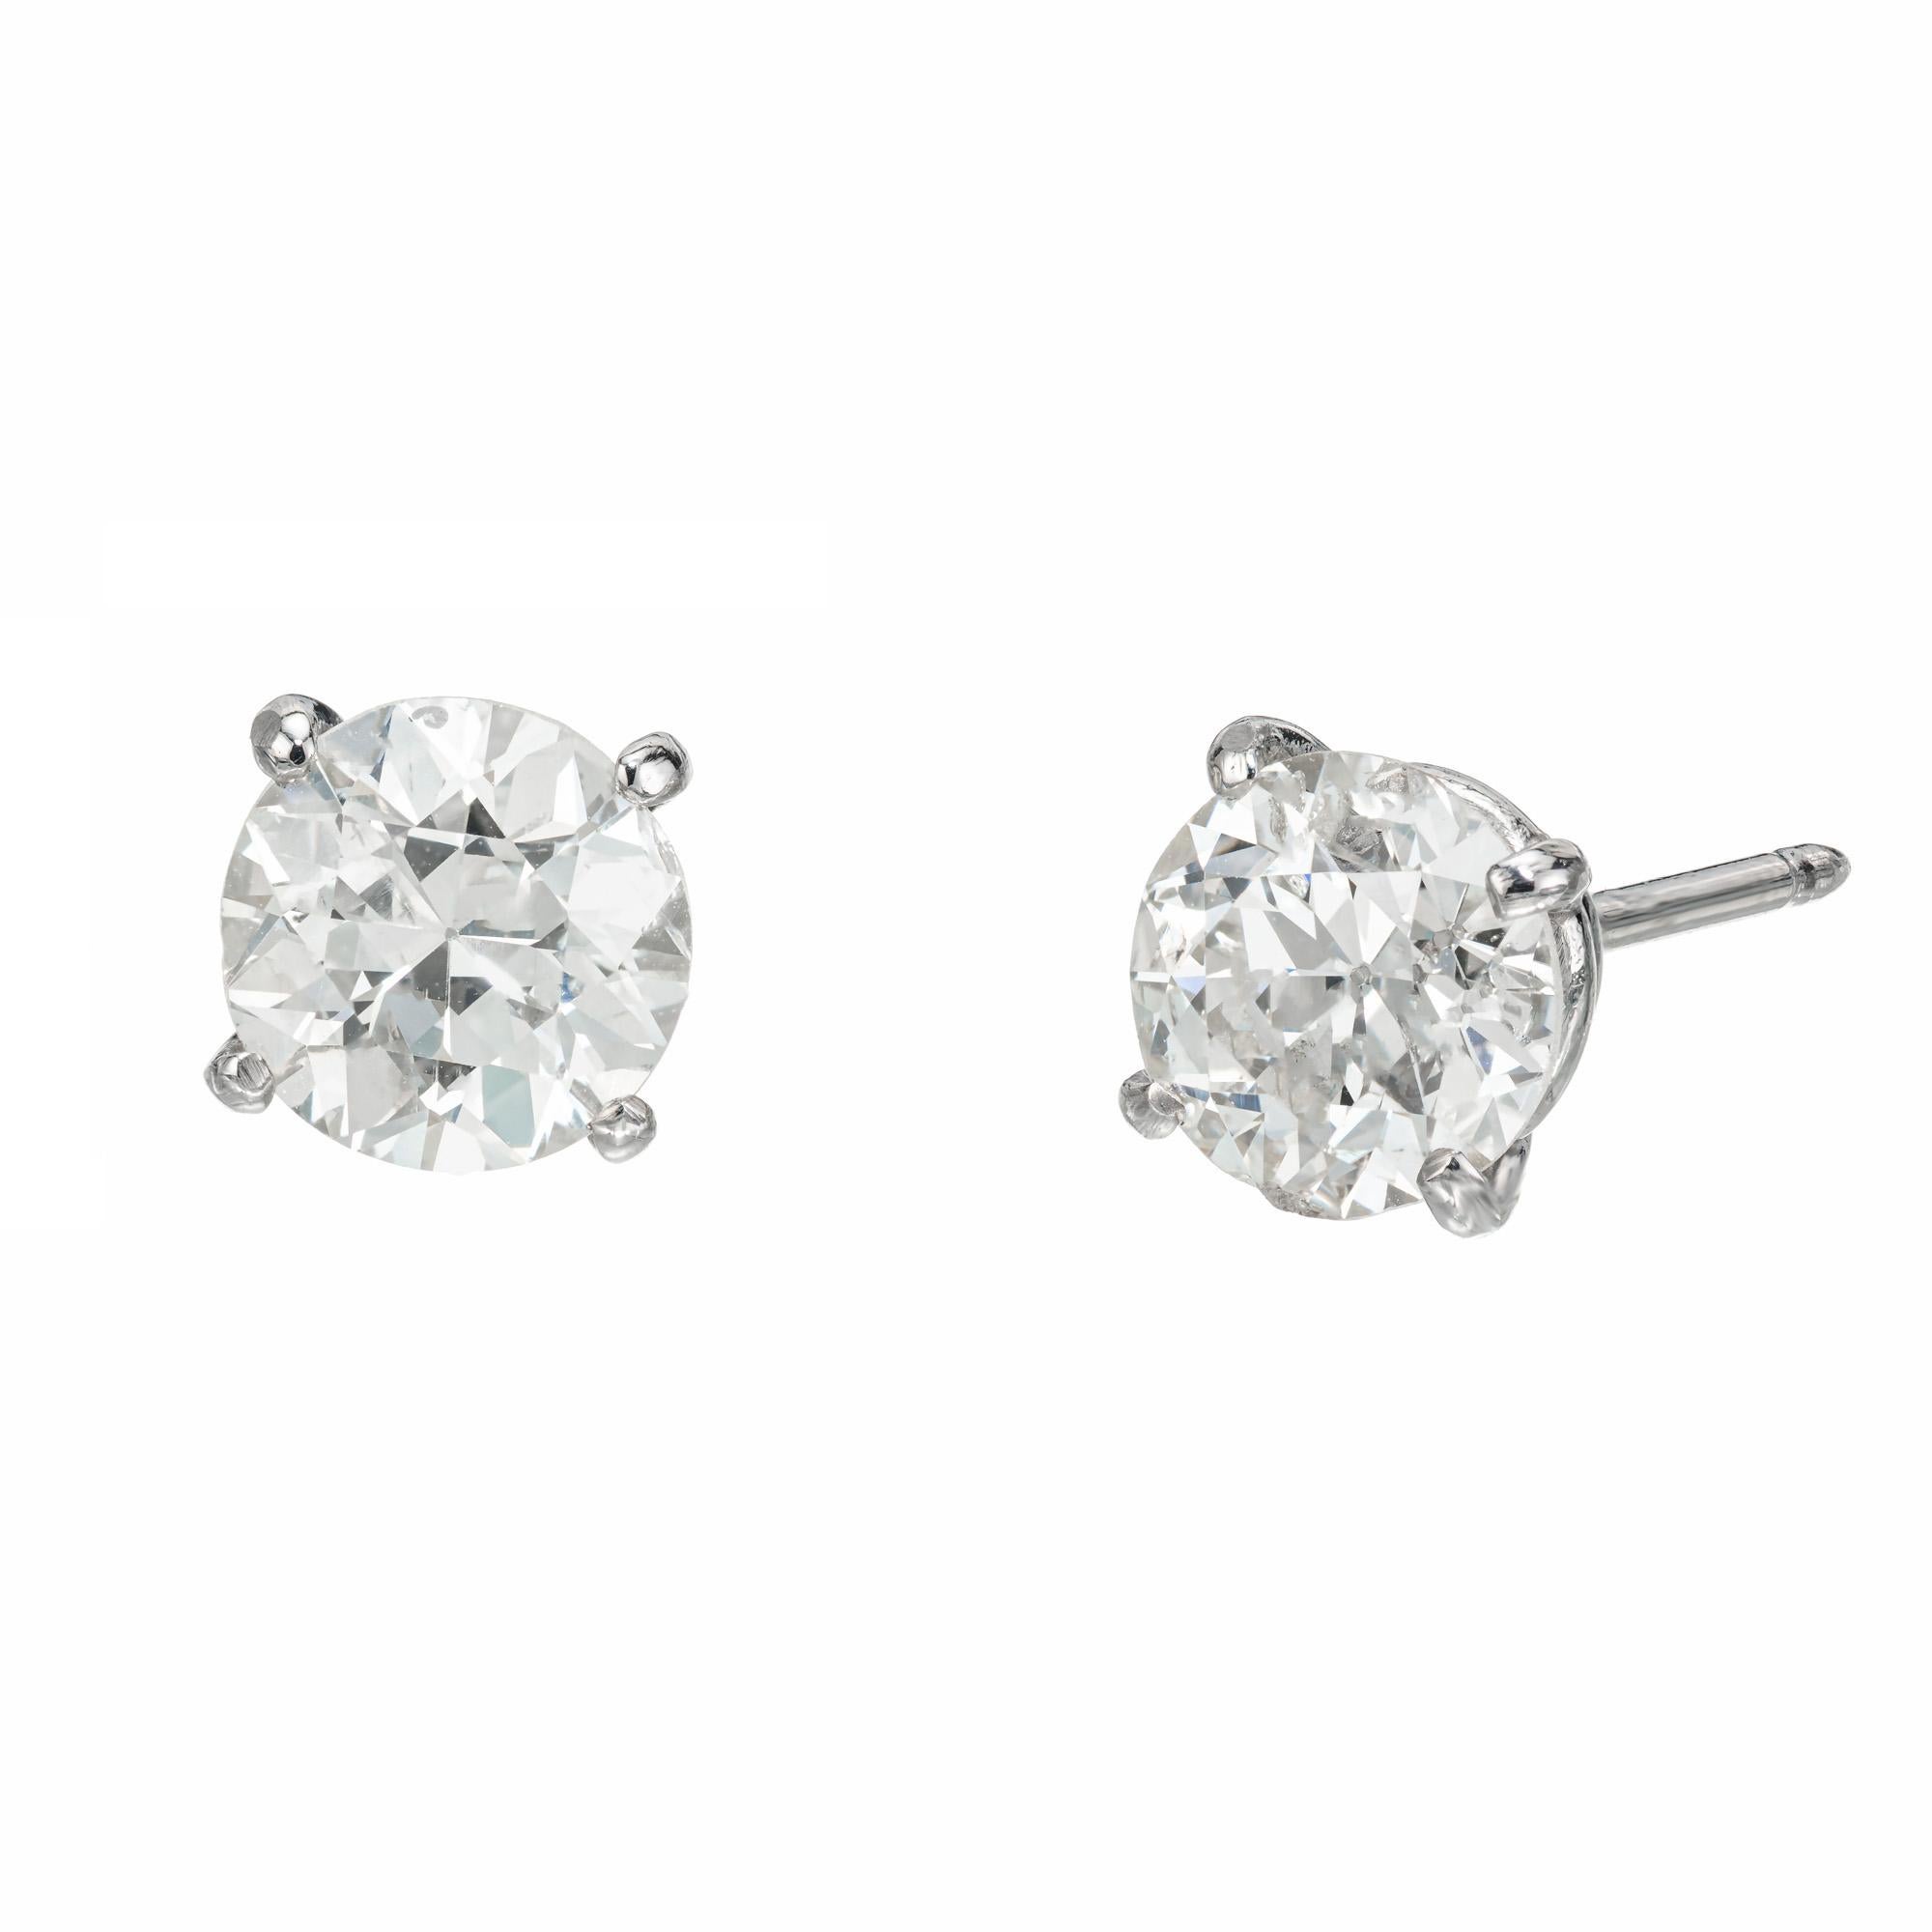 2 round GIA certified diamonds set in platinum 4 prong basket settings.  

1 round old European cut diamond, L I2 approx. 1.23cts GIA Certificate # 2221033431
1 circular brilliant cut diamond, L I approx. 1.27cts GIA Certificate #